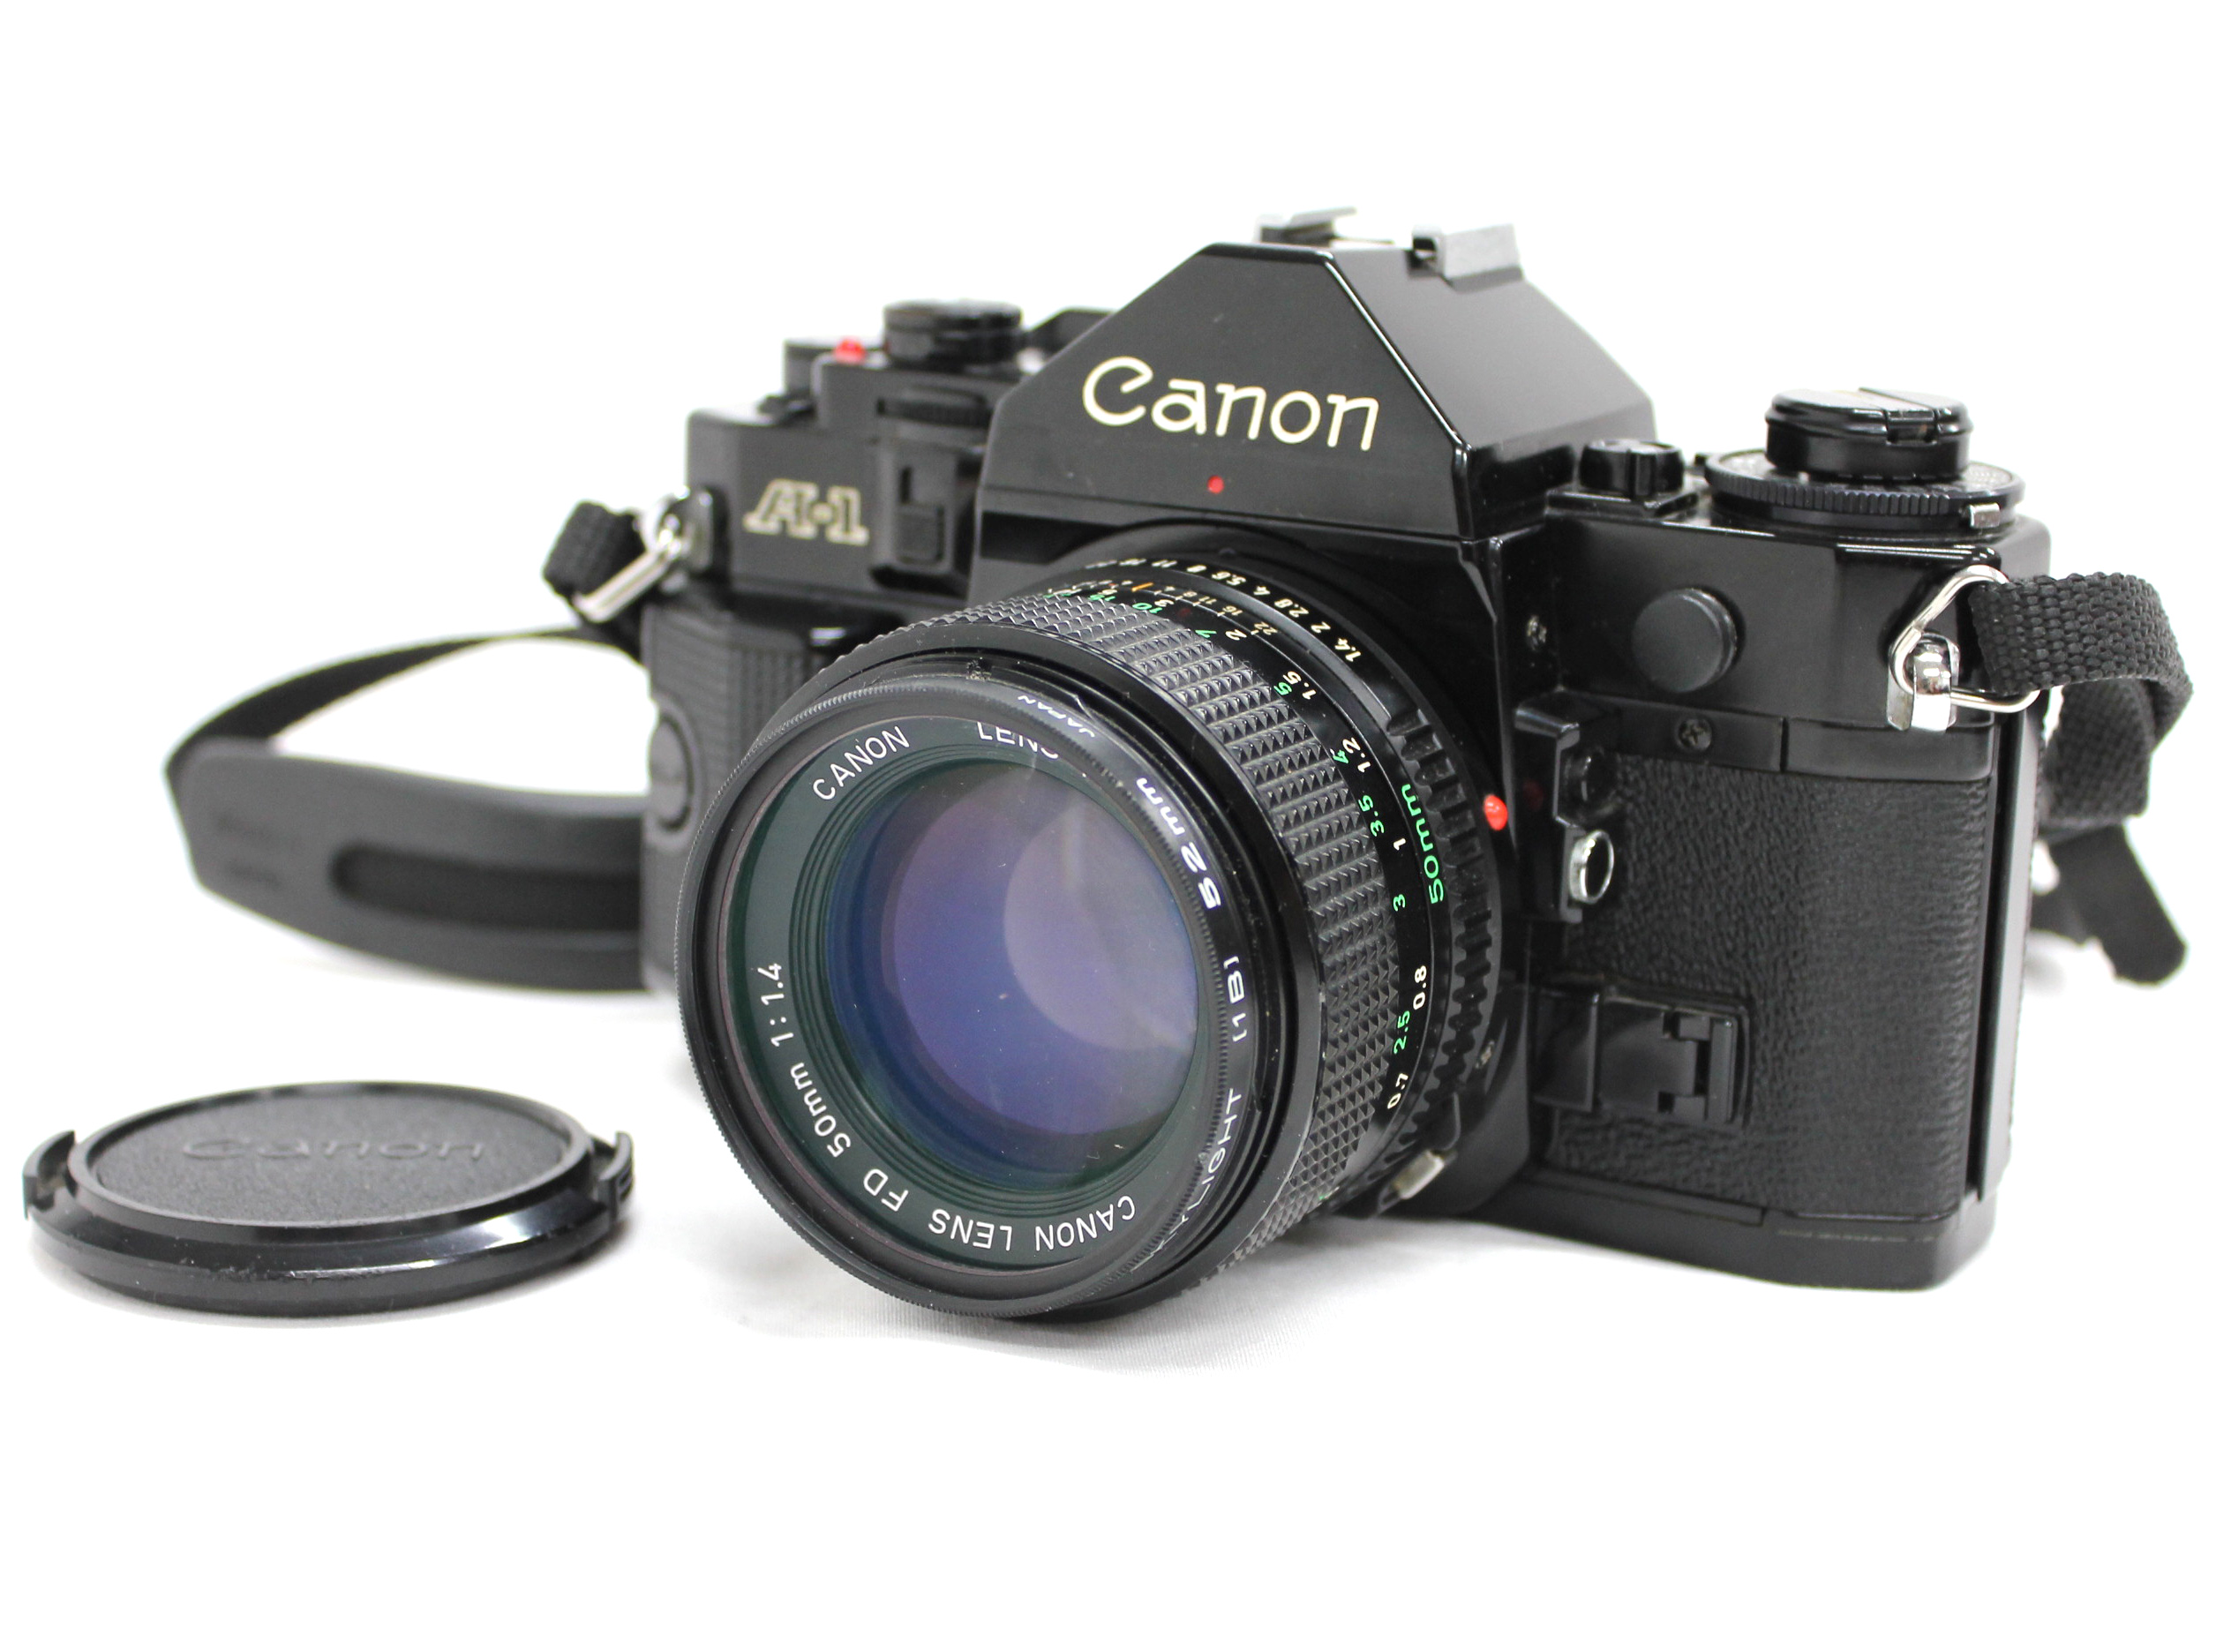 Japan Used Camera Shop | [Excellent+++] Canon A-1 35mm SLR Film Camera with New FD 50mm F/1.4 Lens from Japan